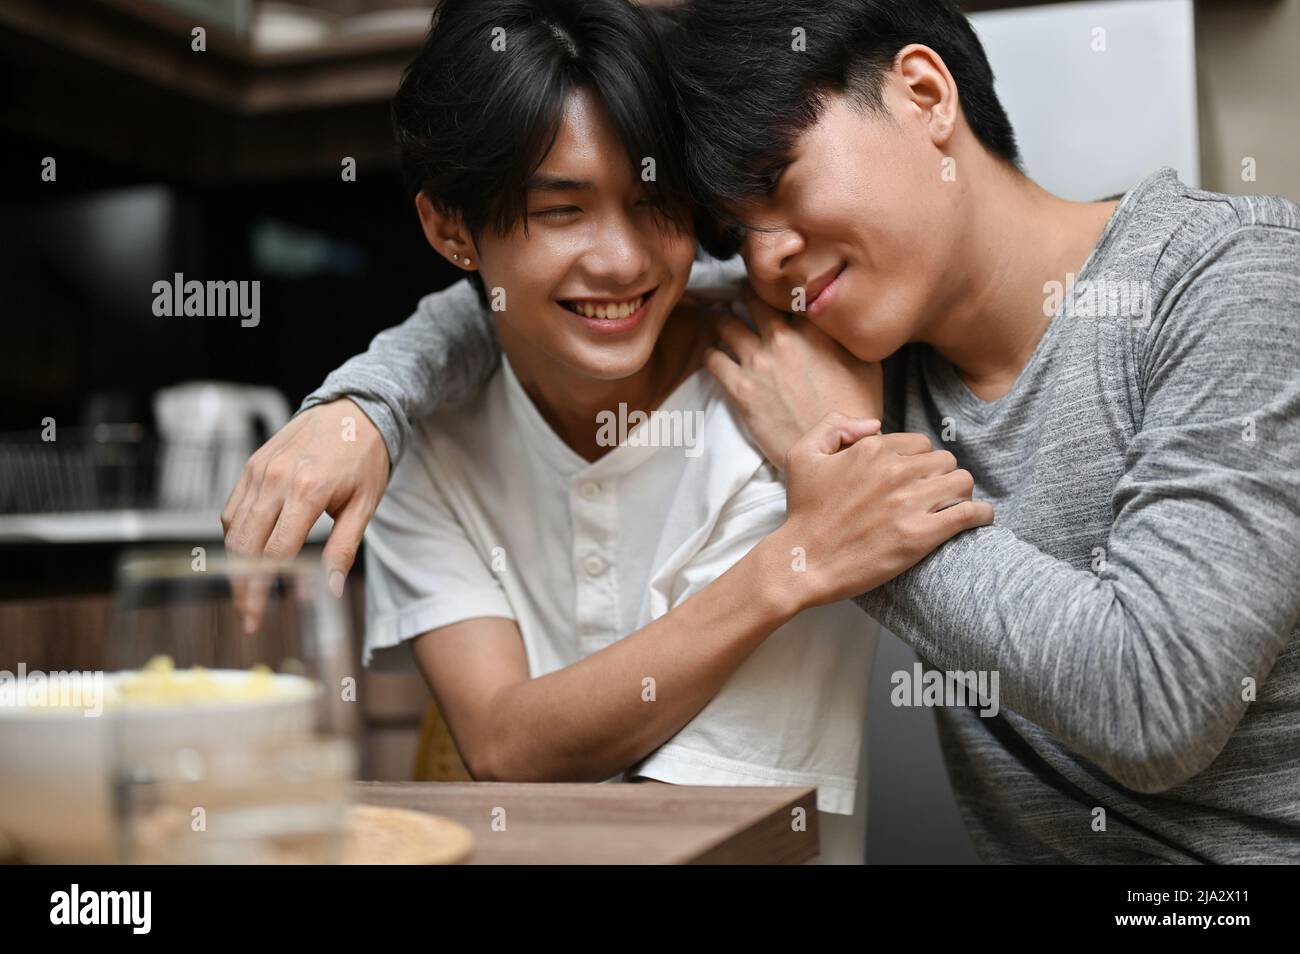 An asian young gay men couples showing some love affection, sharing a special feeling, arms around each other, happy to be together. LGBT couples conc Stock Photo